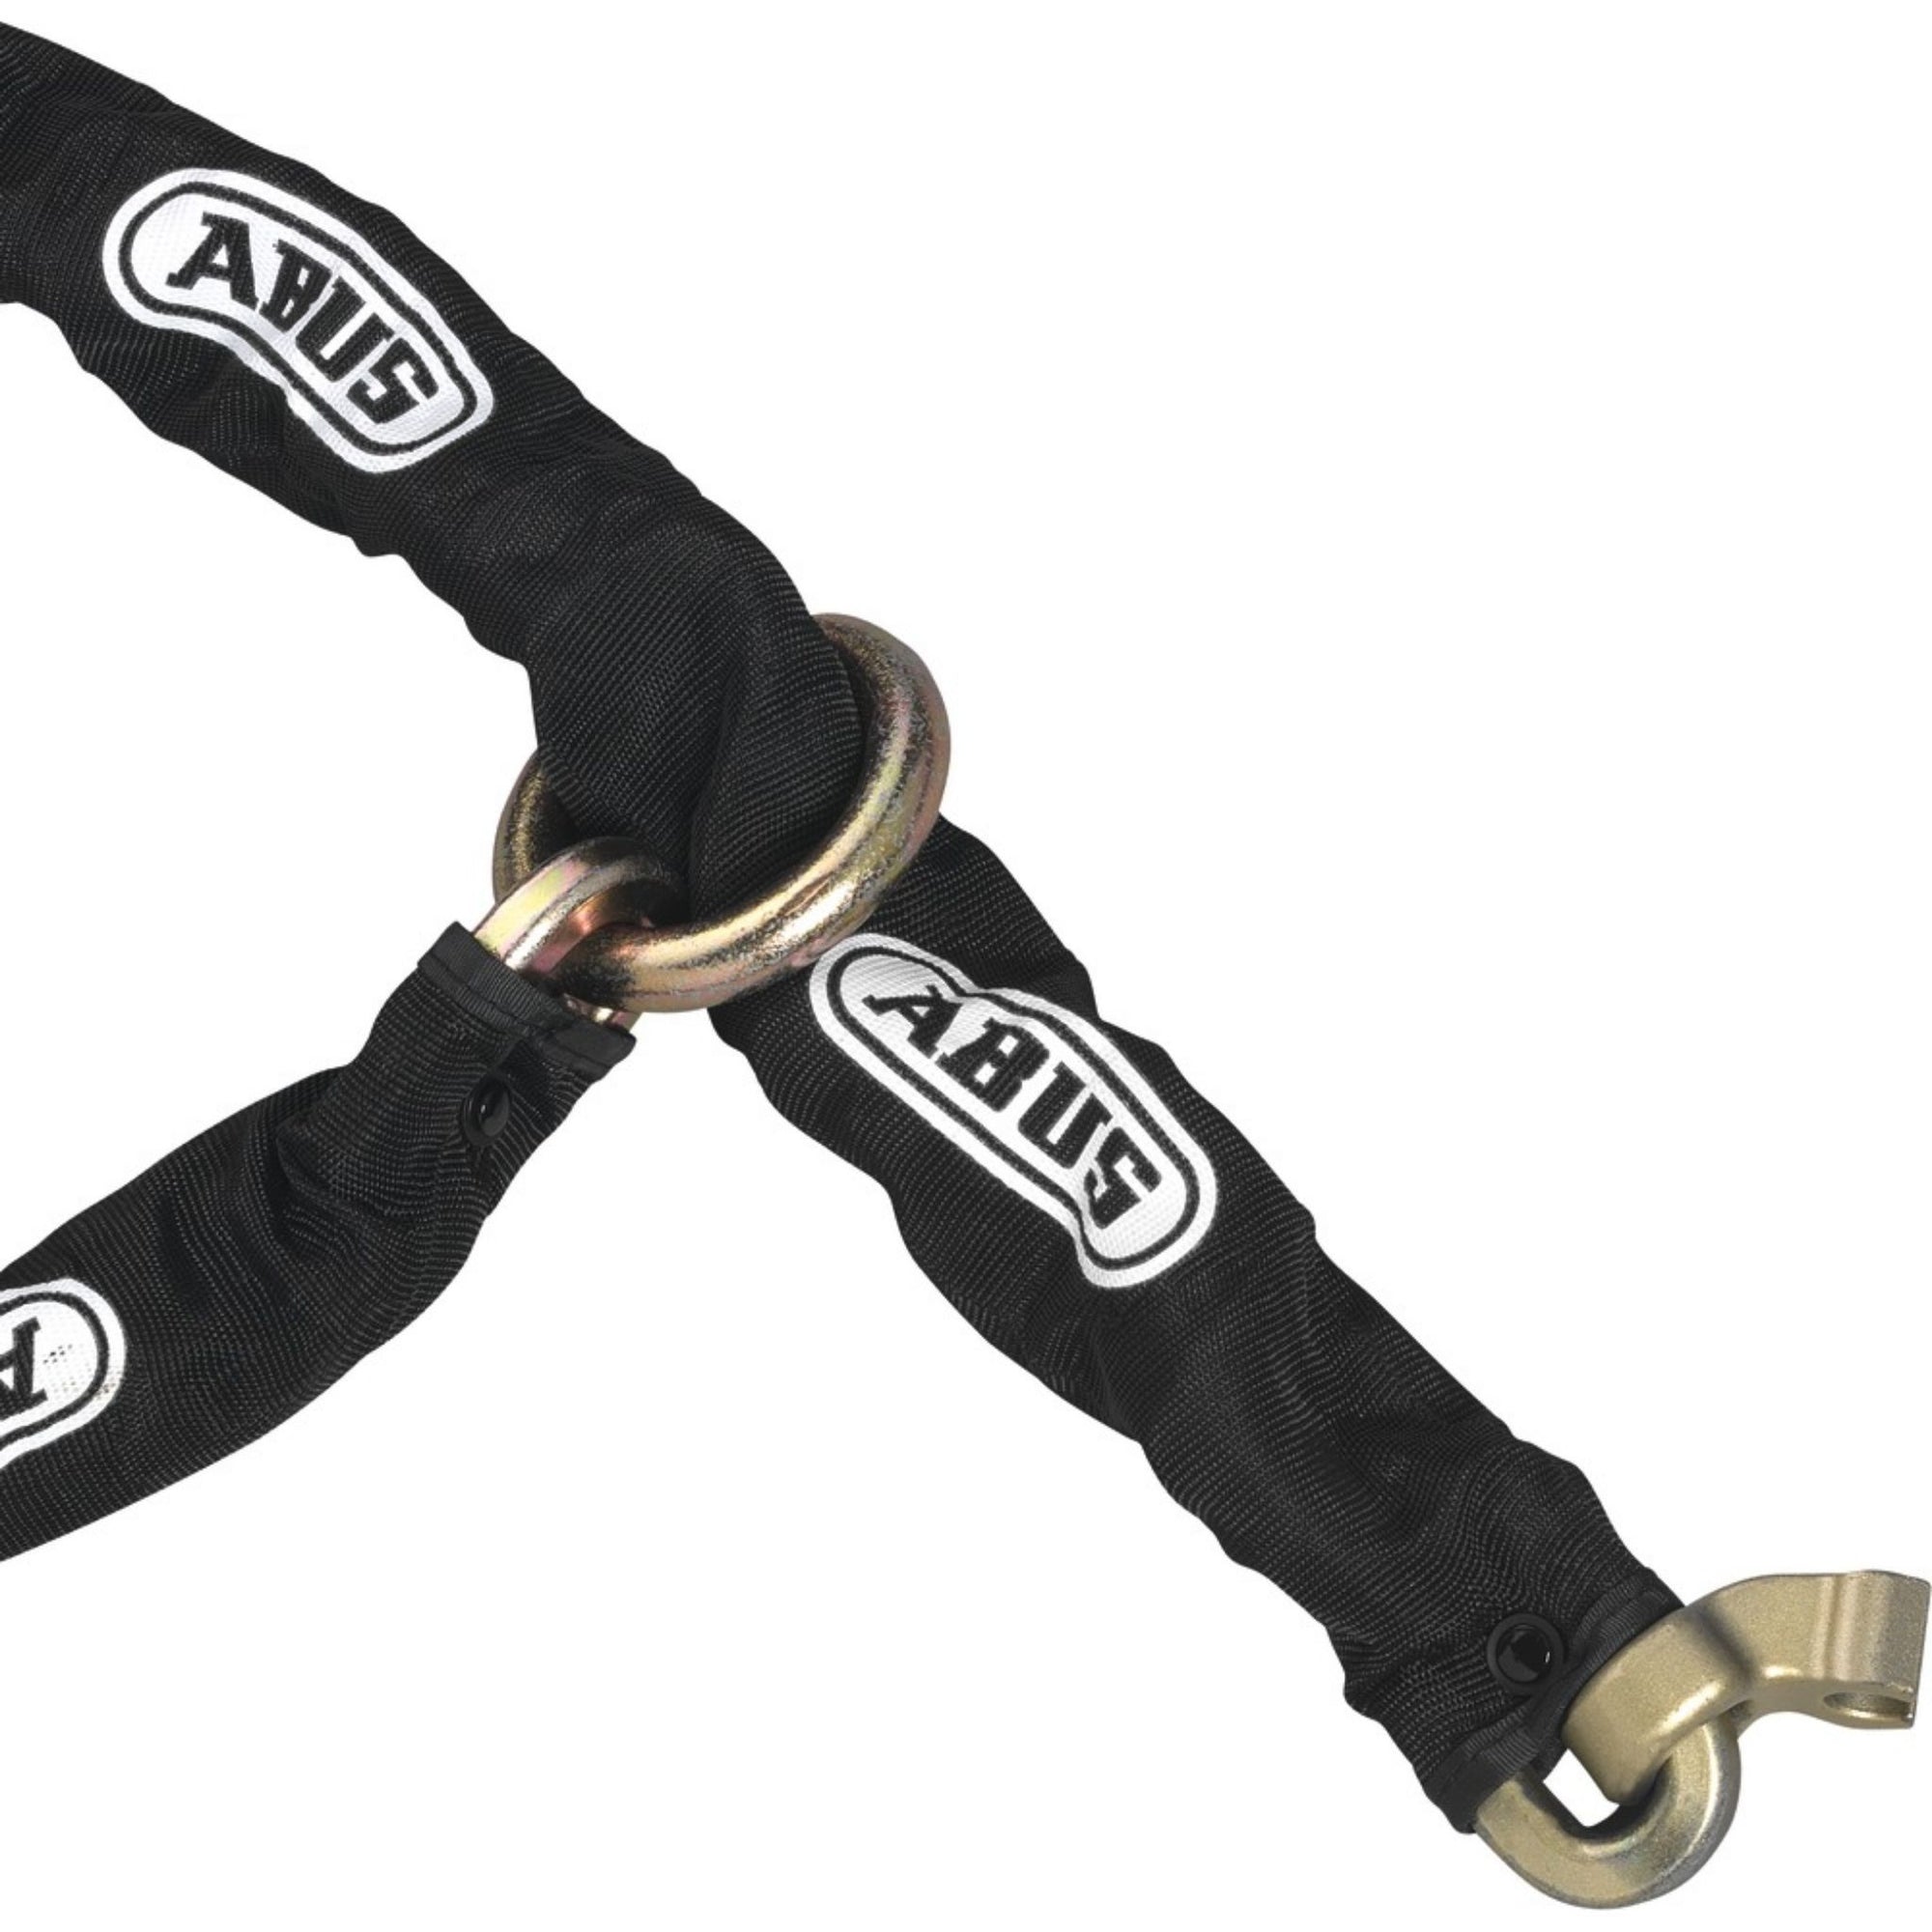 Abus 5-Foot Pre-Cut Chain with Loop & Fitted Sleeve, 1/2" Thick Chains (12KS) - The Lock Source